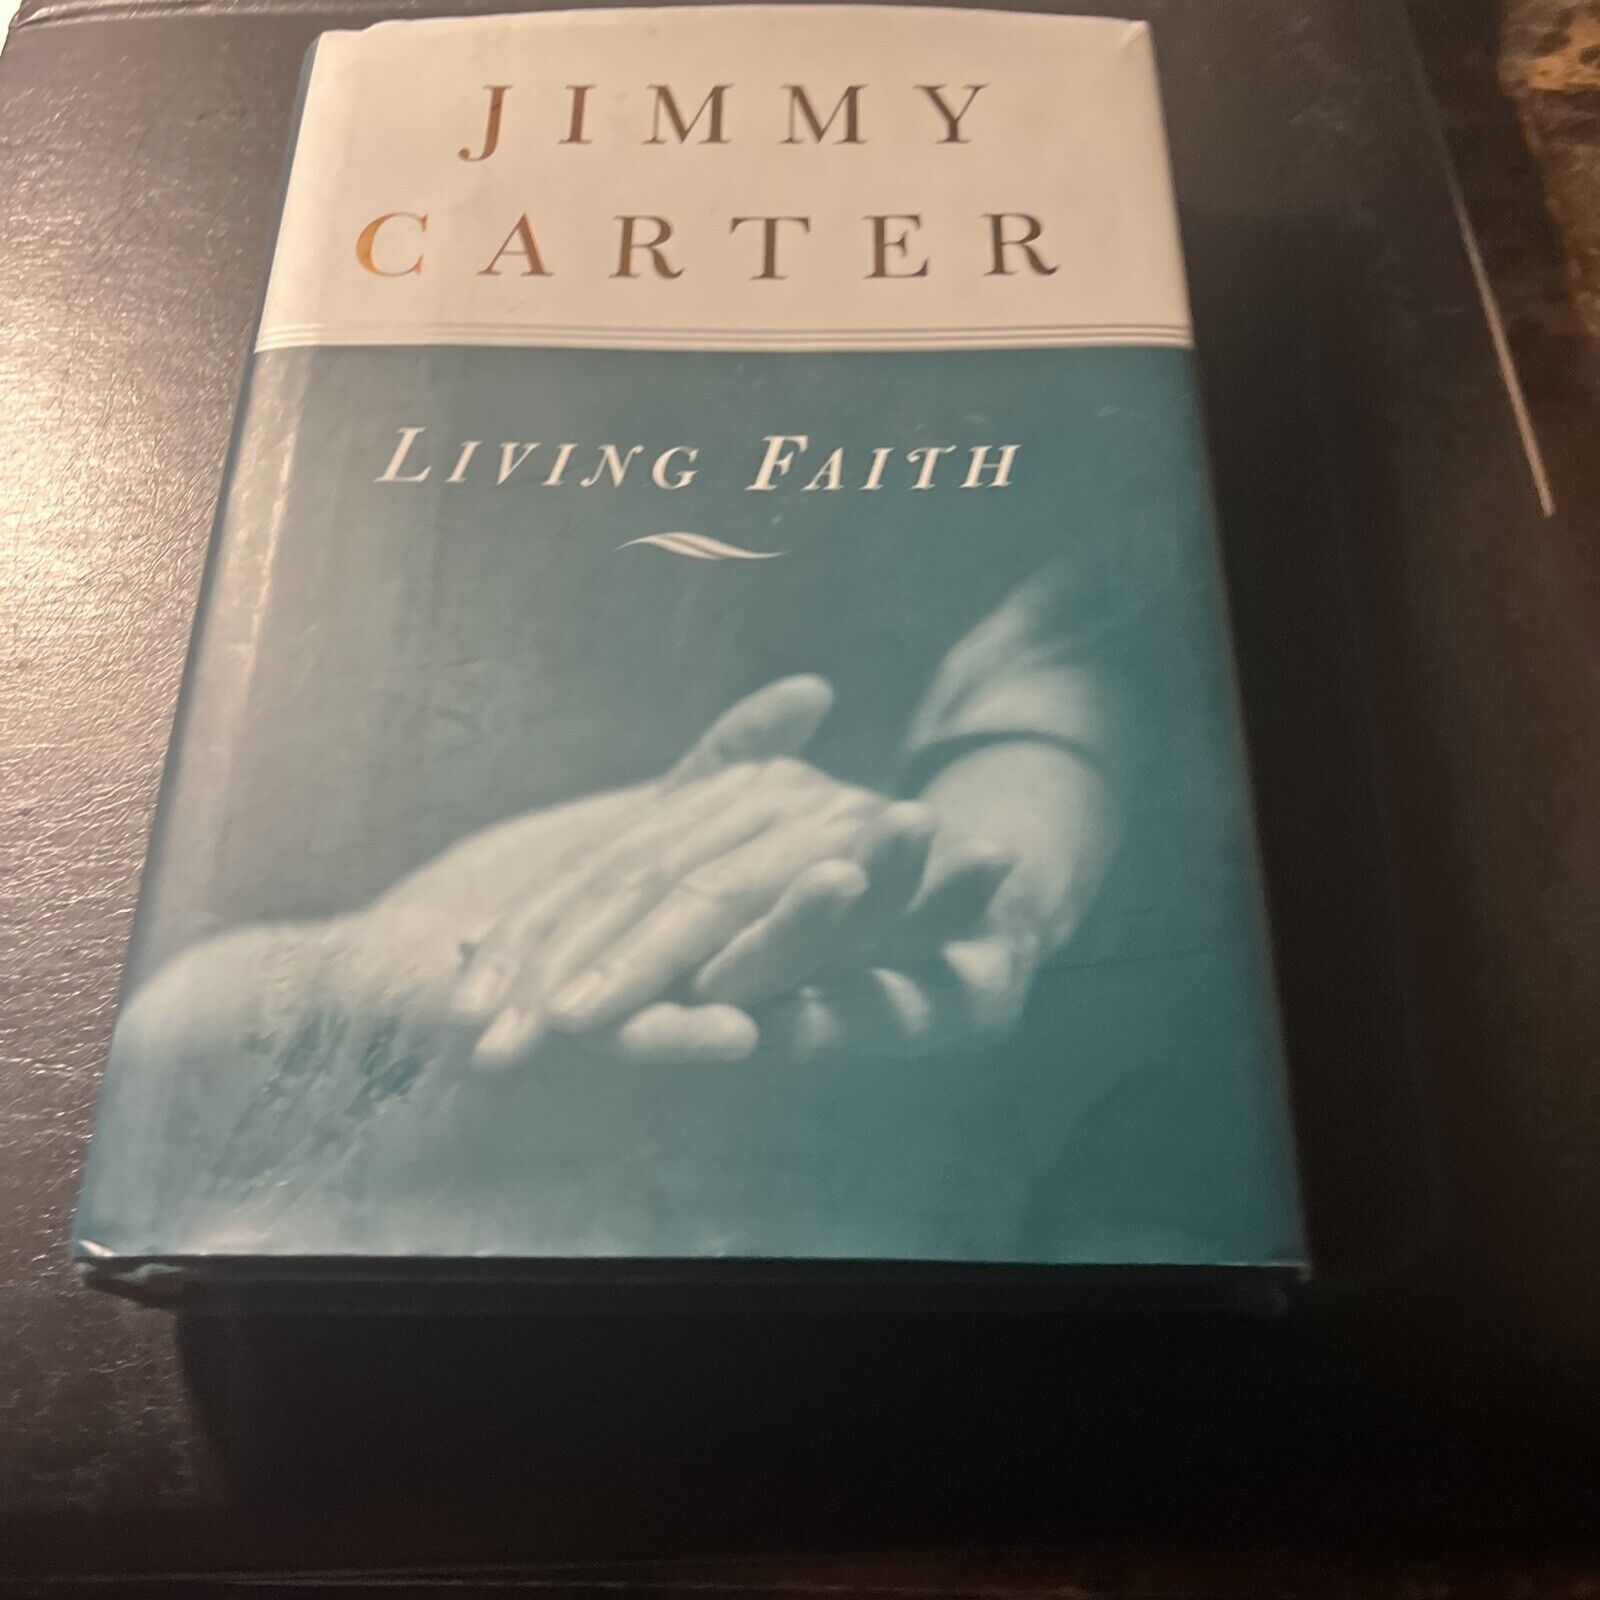 Living Faith By Jimmy Carter Signed By POTUS Jimmy Carter Nice